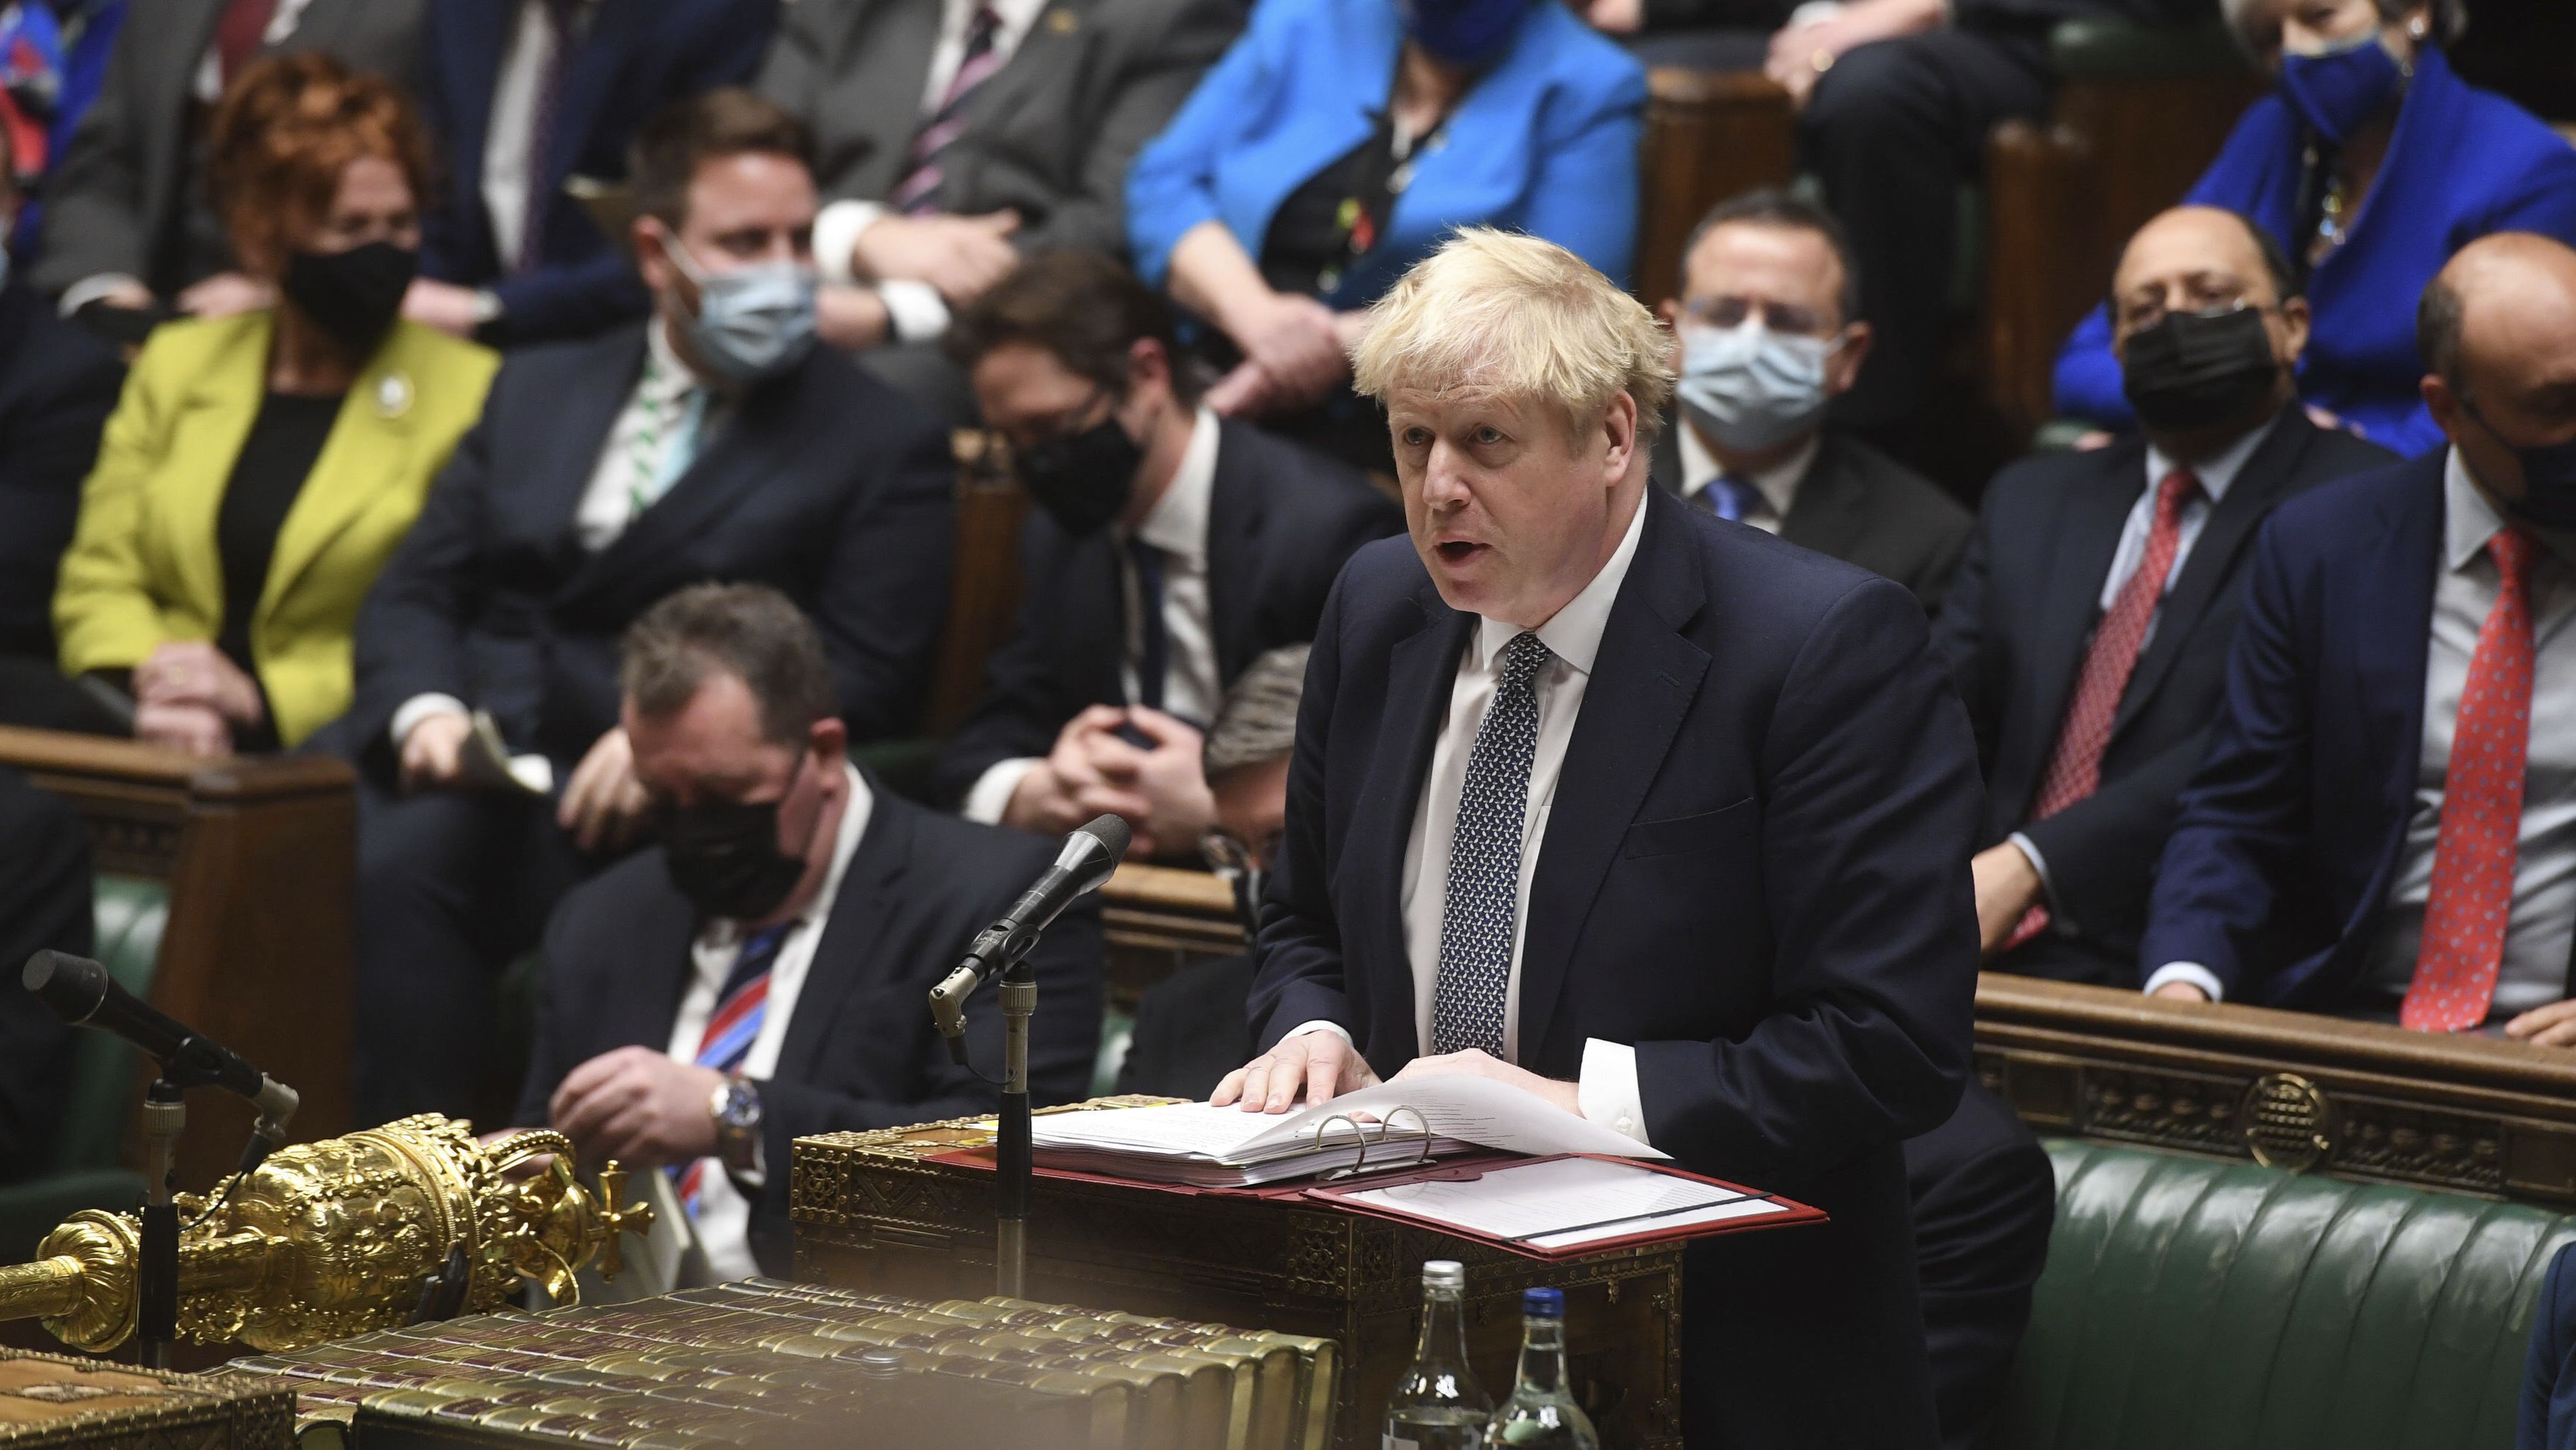 Johnson speaks in the House of Commons in January 2022. He<a href="https://www.cnn.com/2022/01/12/uk/boris-johnson-pmqs-downing-street-party-intl-gbr/index.html" target="_blank"> apologized</a> for attending a May 2020 garden party that took place while the UK was in a hard lockdown to combat the spread of Covid-19. Johnson told lawmakers he believed the gathering to be a work event but that, with hindsight, he should have sent attendees back inside.